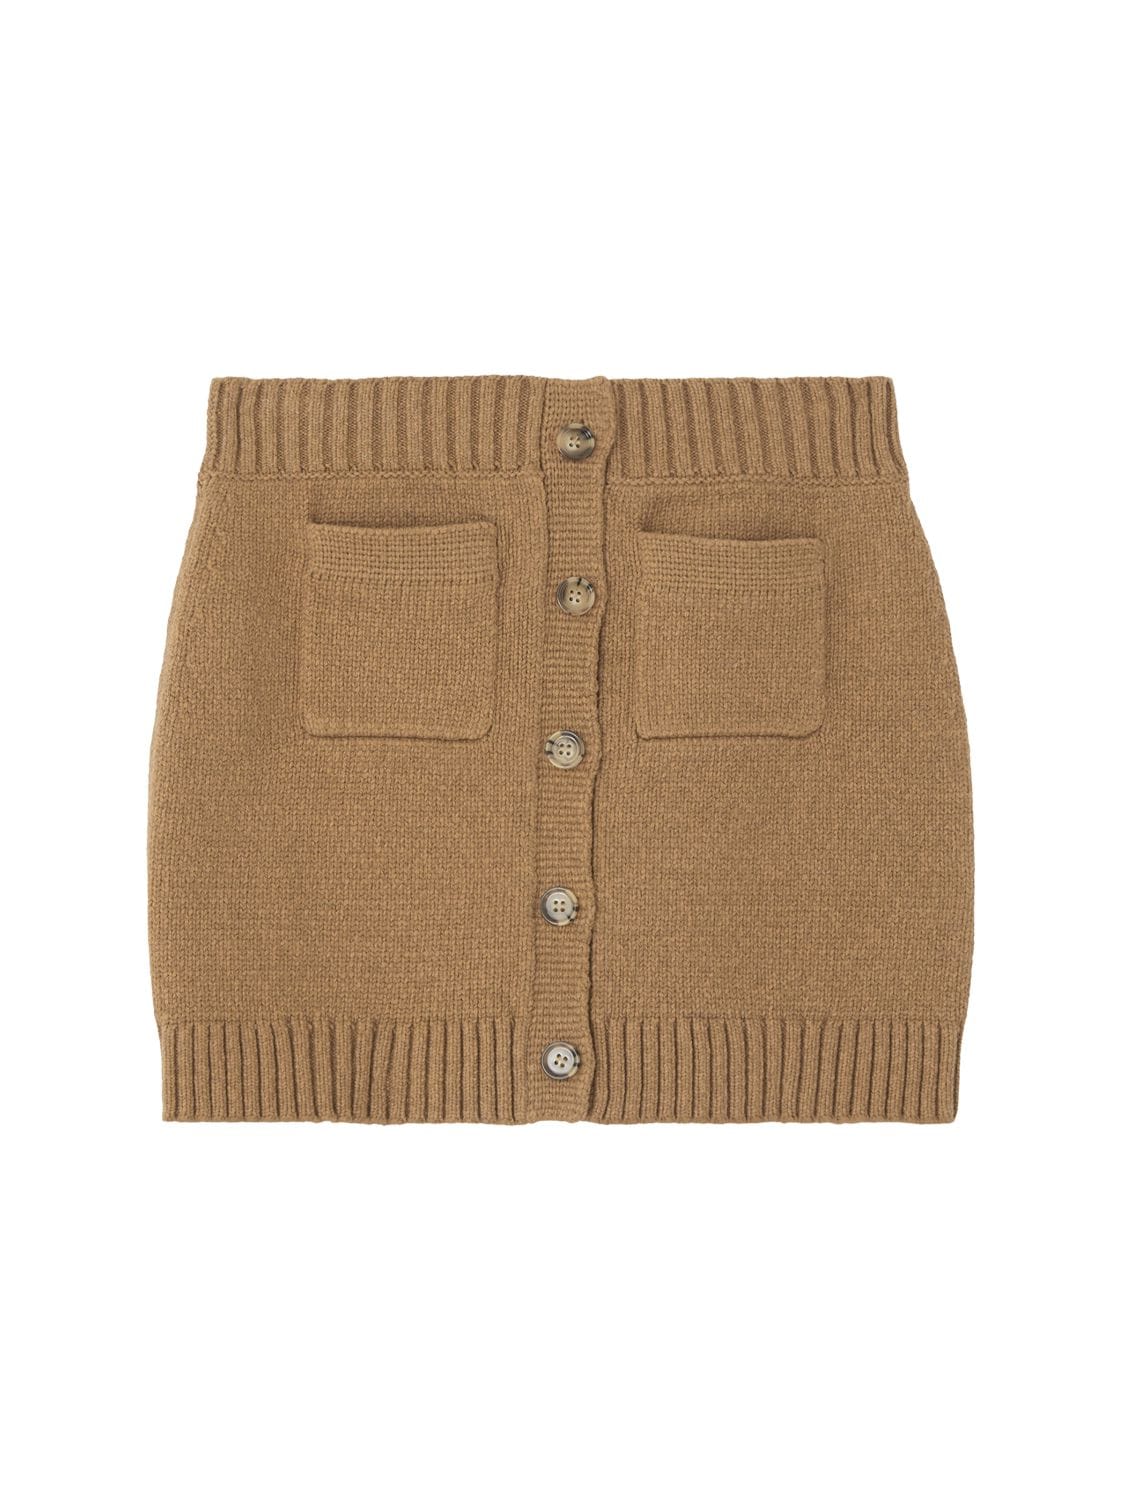 BURBERRY BLANCHE KNITTED COTTON BLEND MINI SKIRT